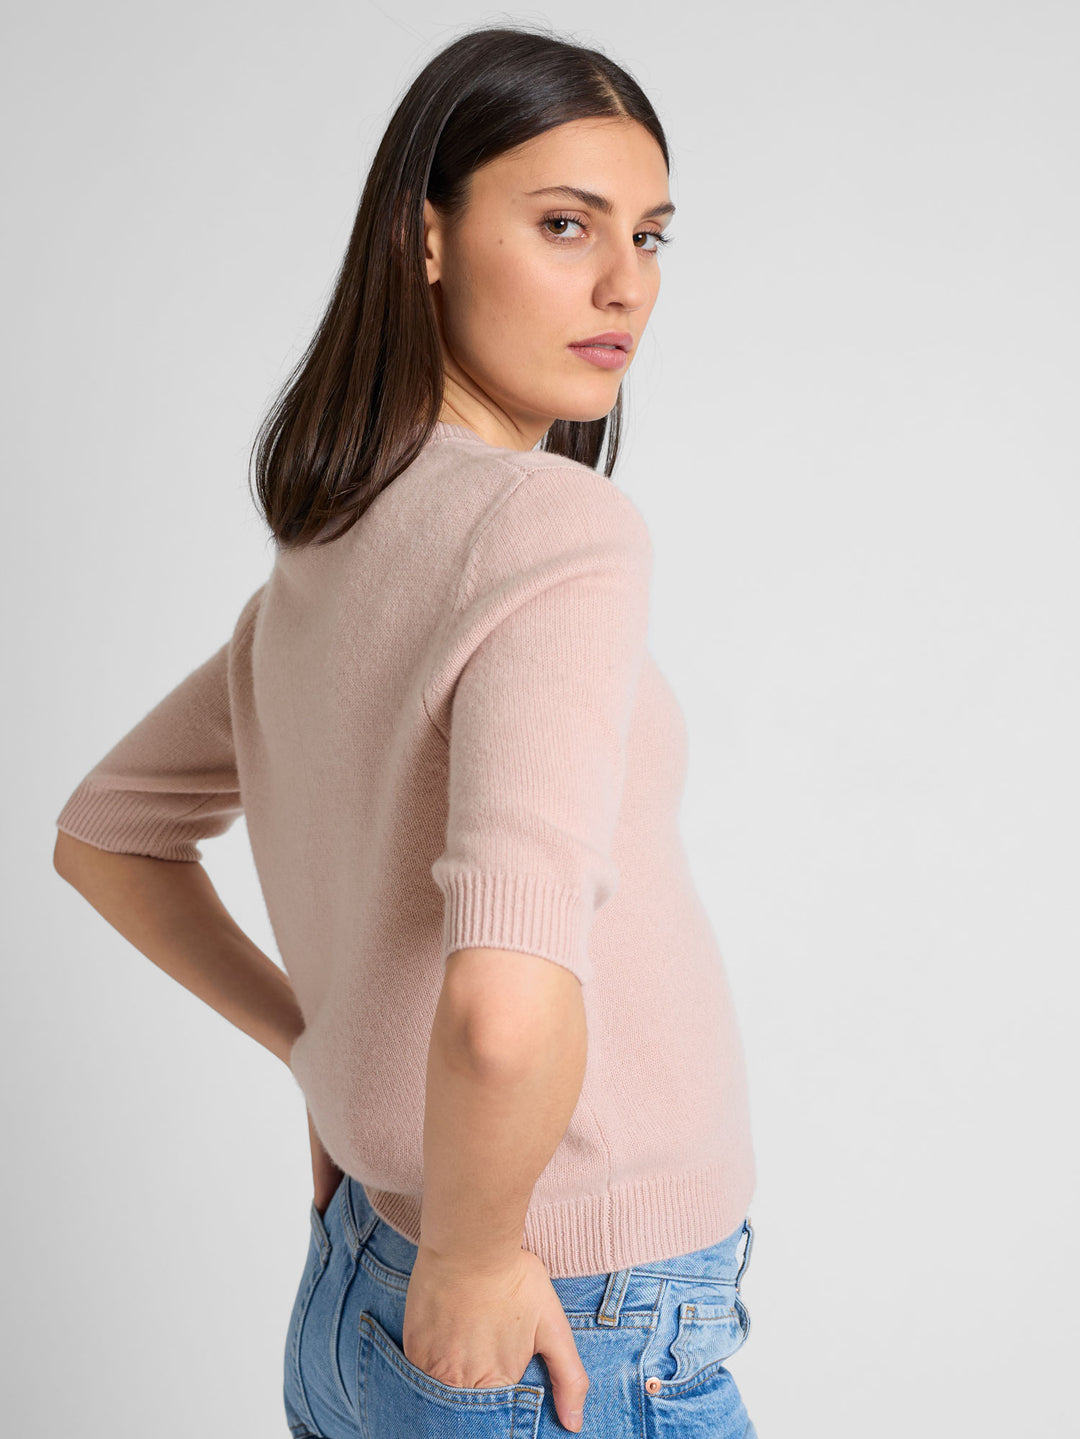 Short sleeved cashmere sweater "Aase" in 100% pure cashmere. Scandinavian design by Kashmina. Color: Rose glow.